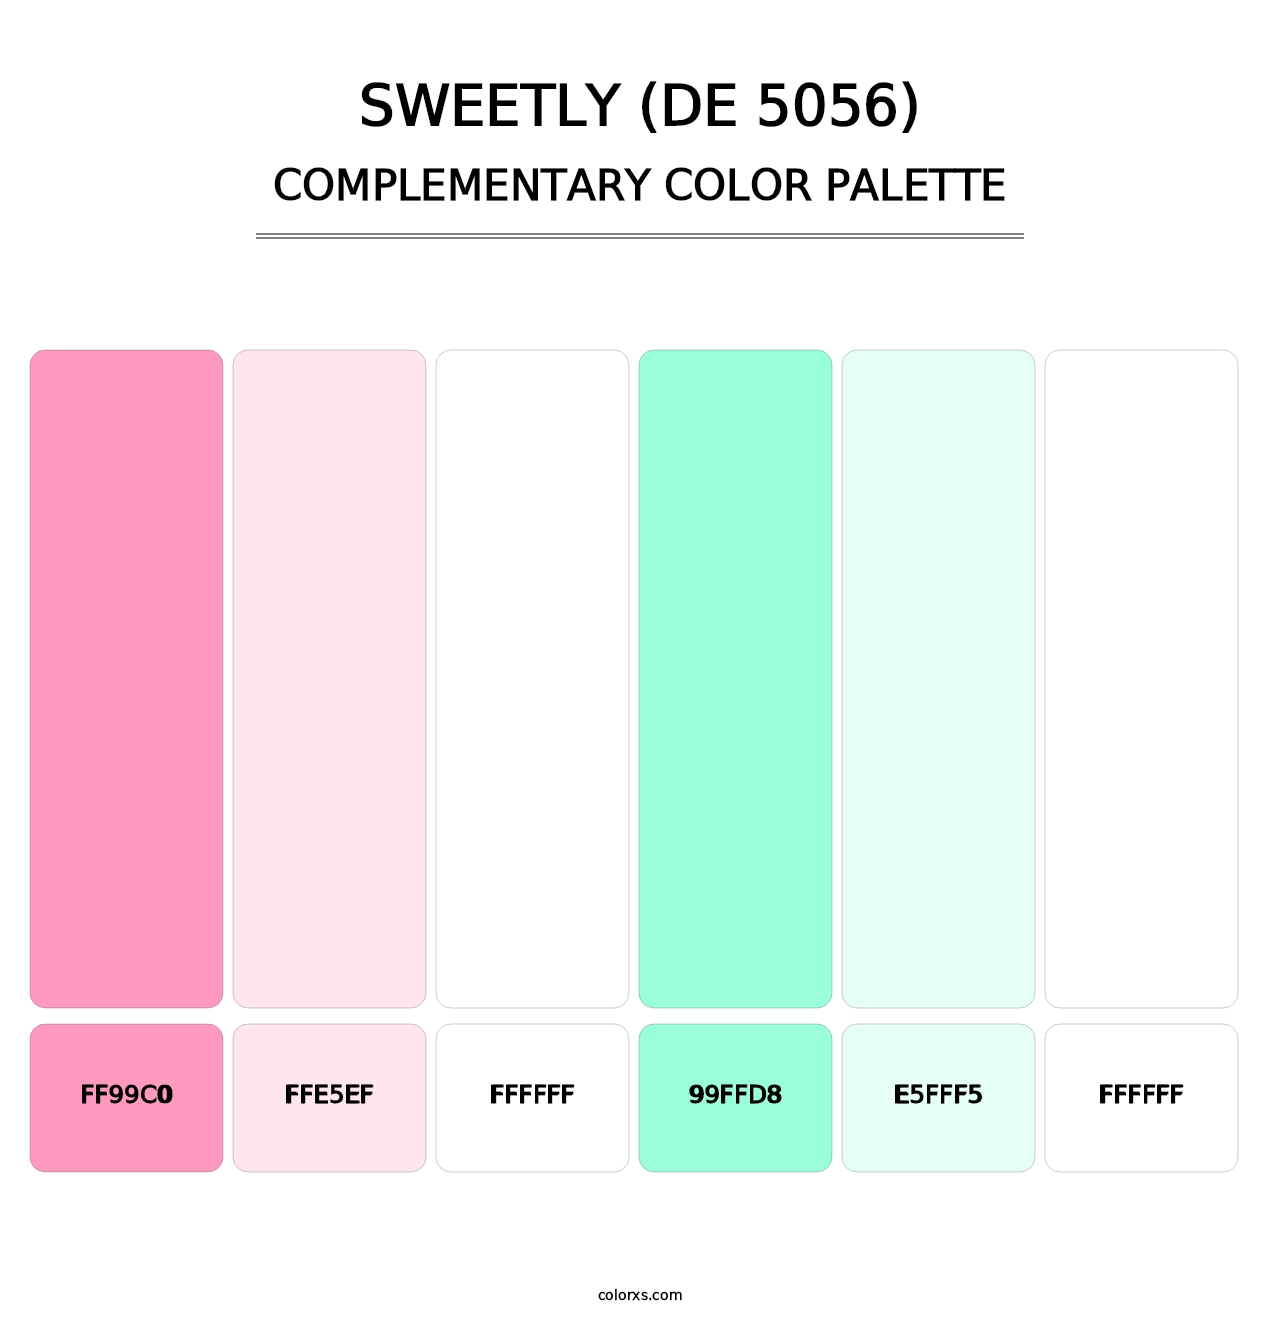 Sweetly (DE 5056) - Complementary Color Palette